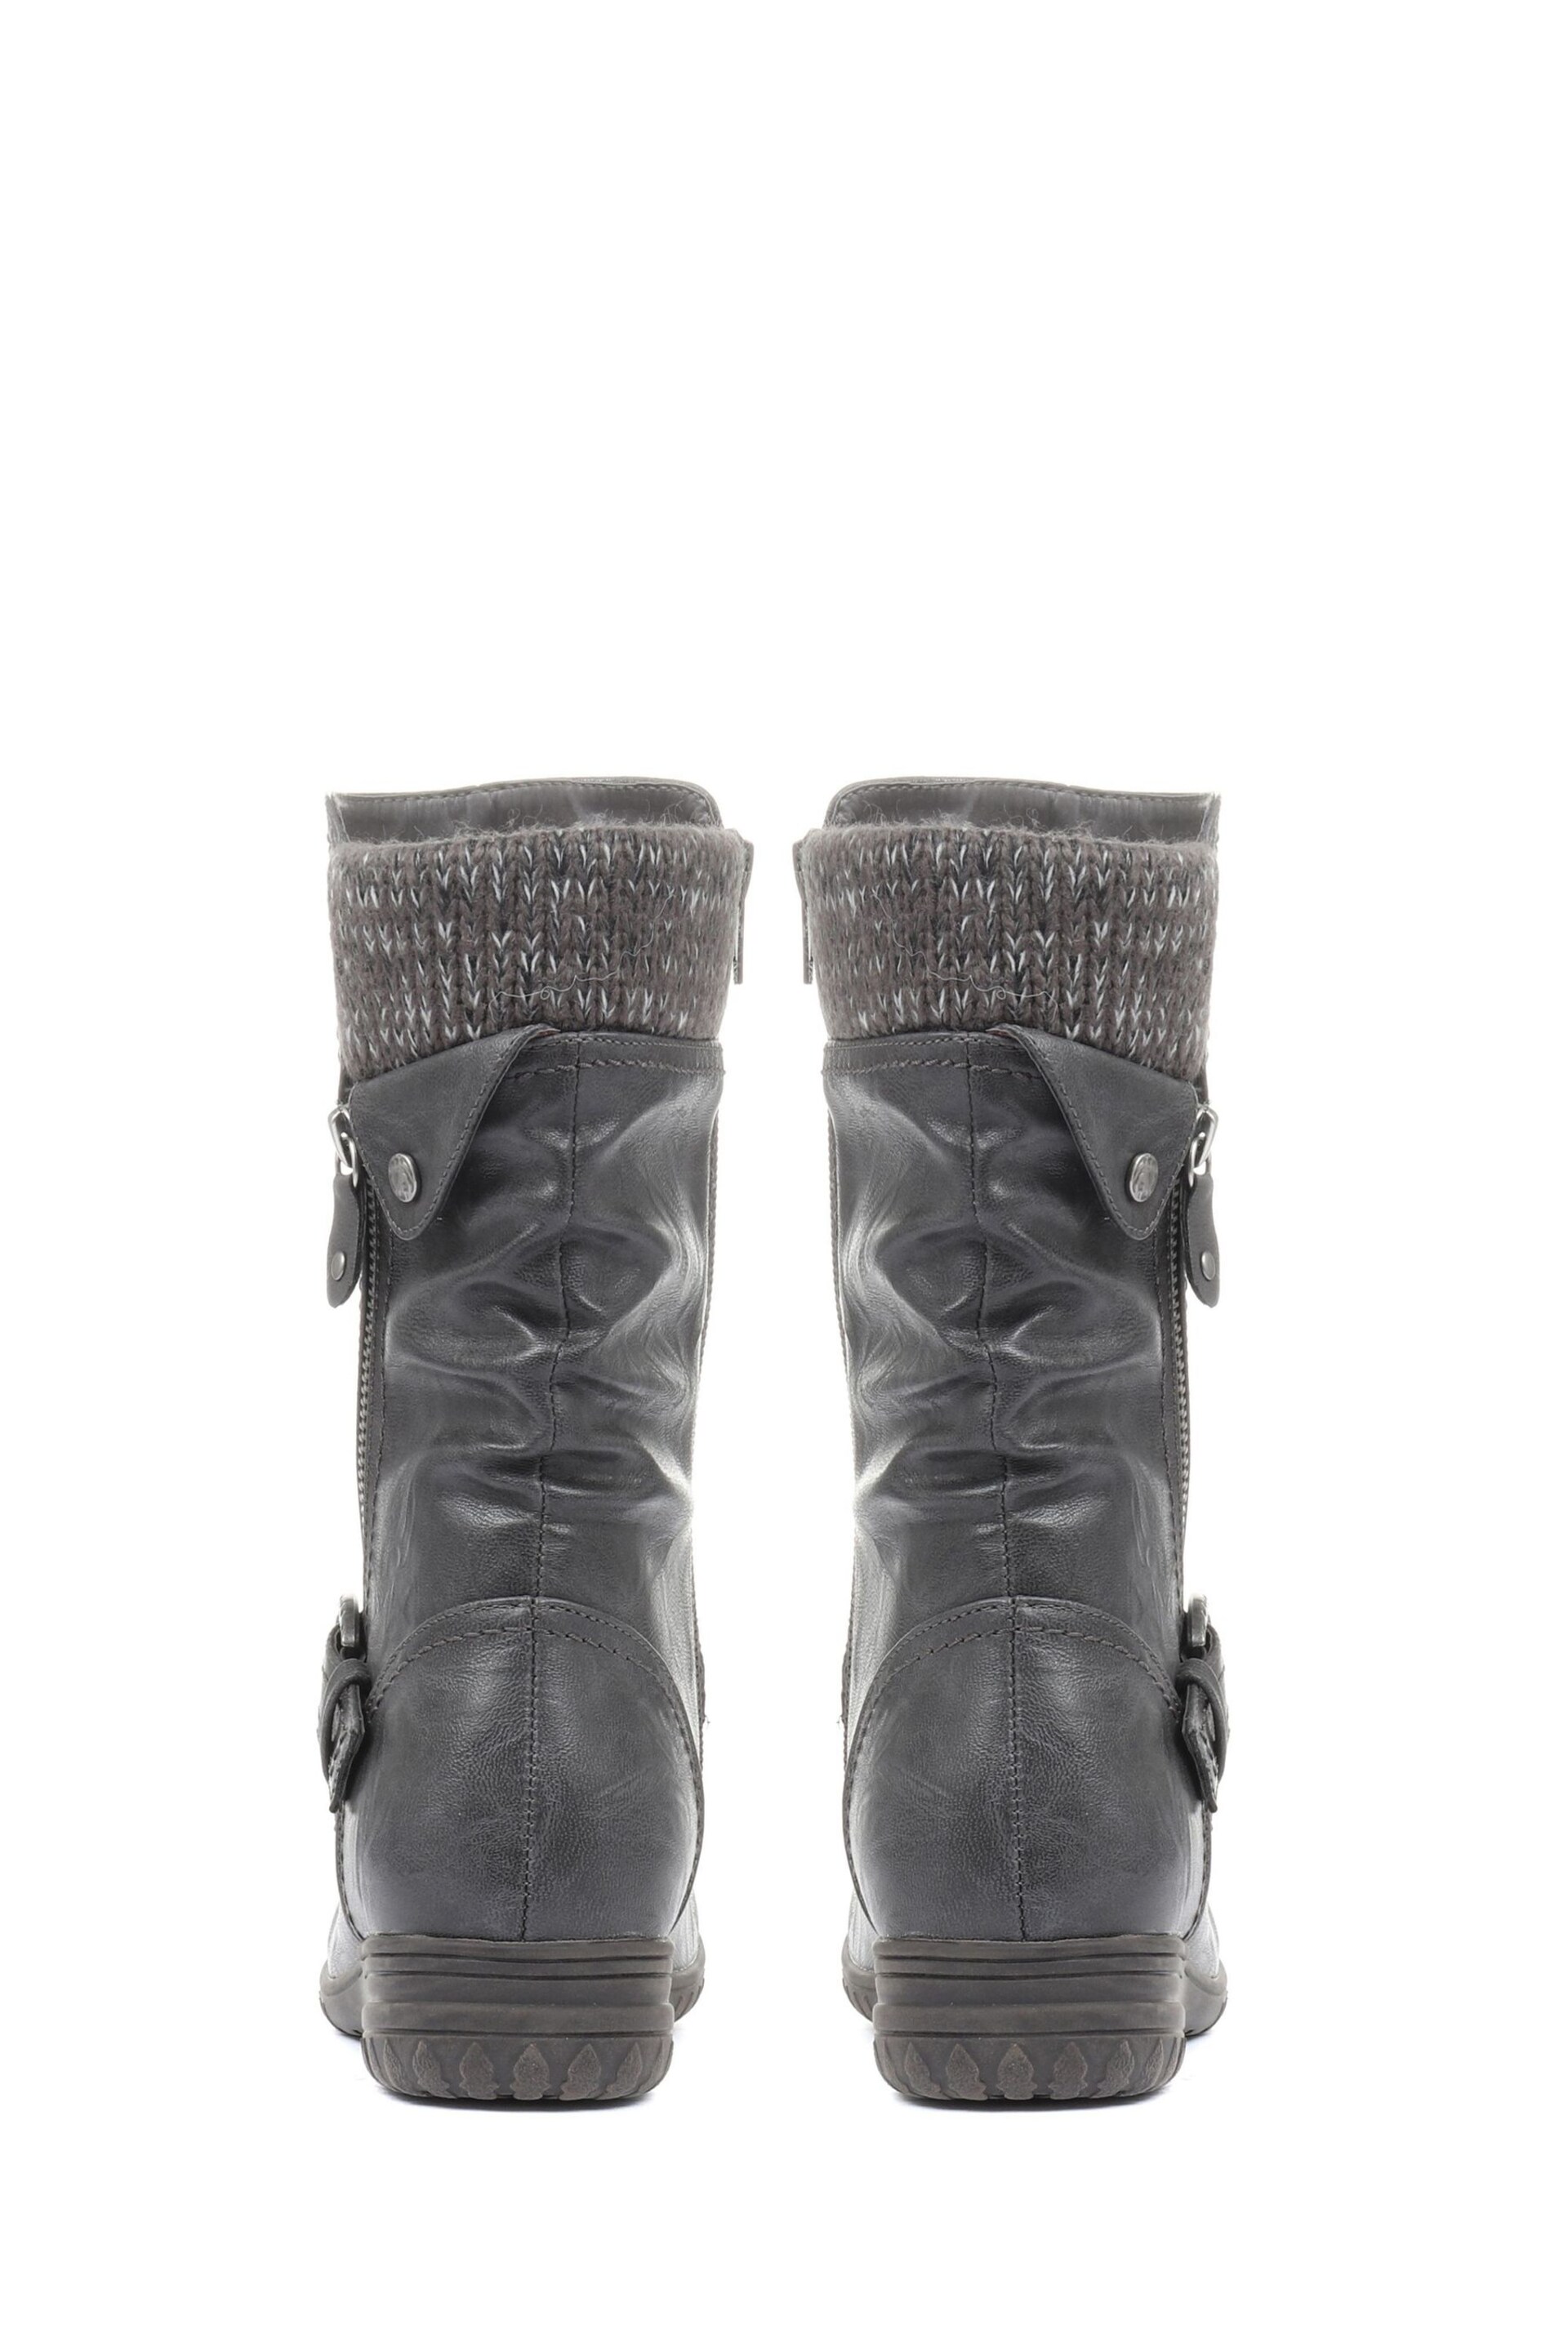 Pavers Ladies Calf Boots - Image 2 of 7